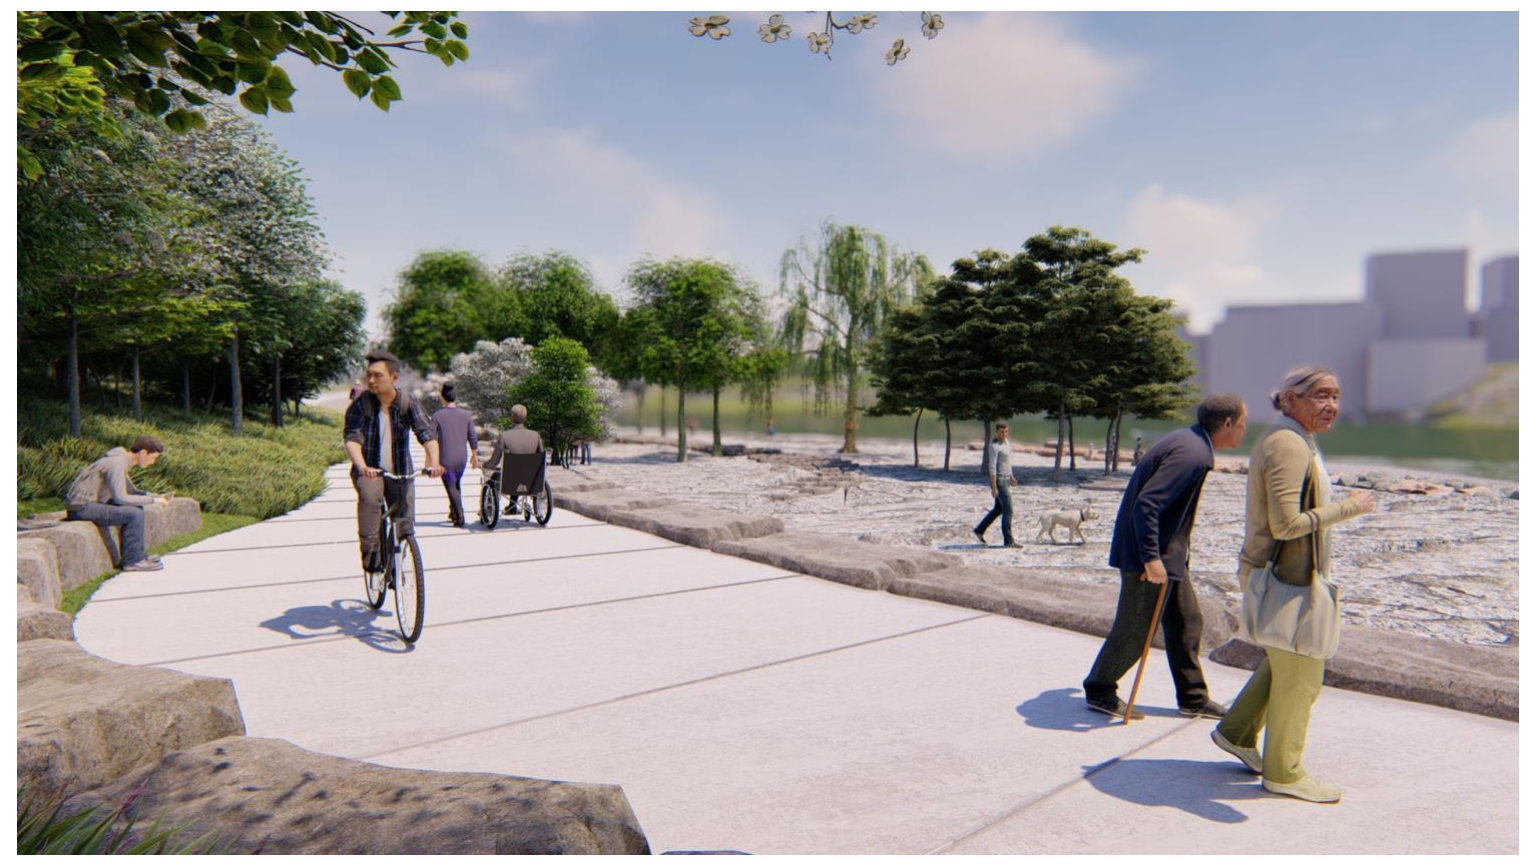 Rendering of the universally accessible pathway.